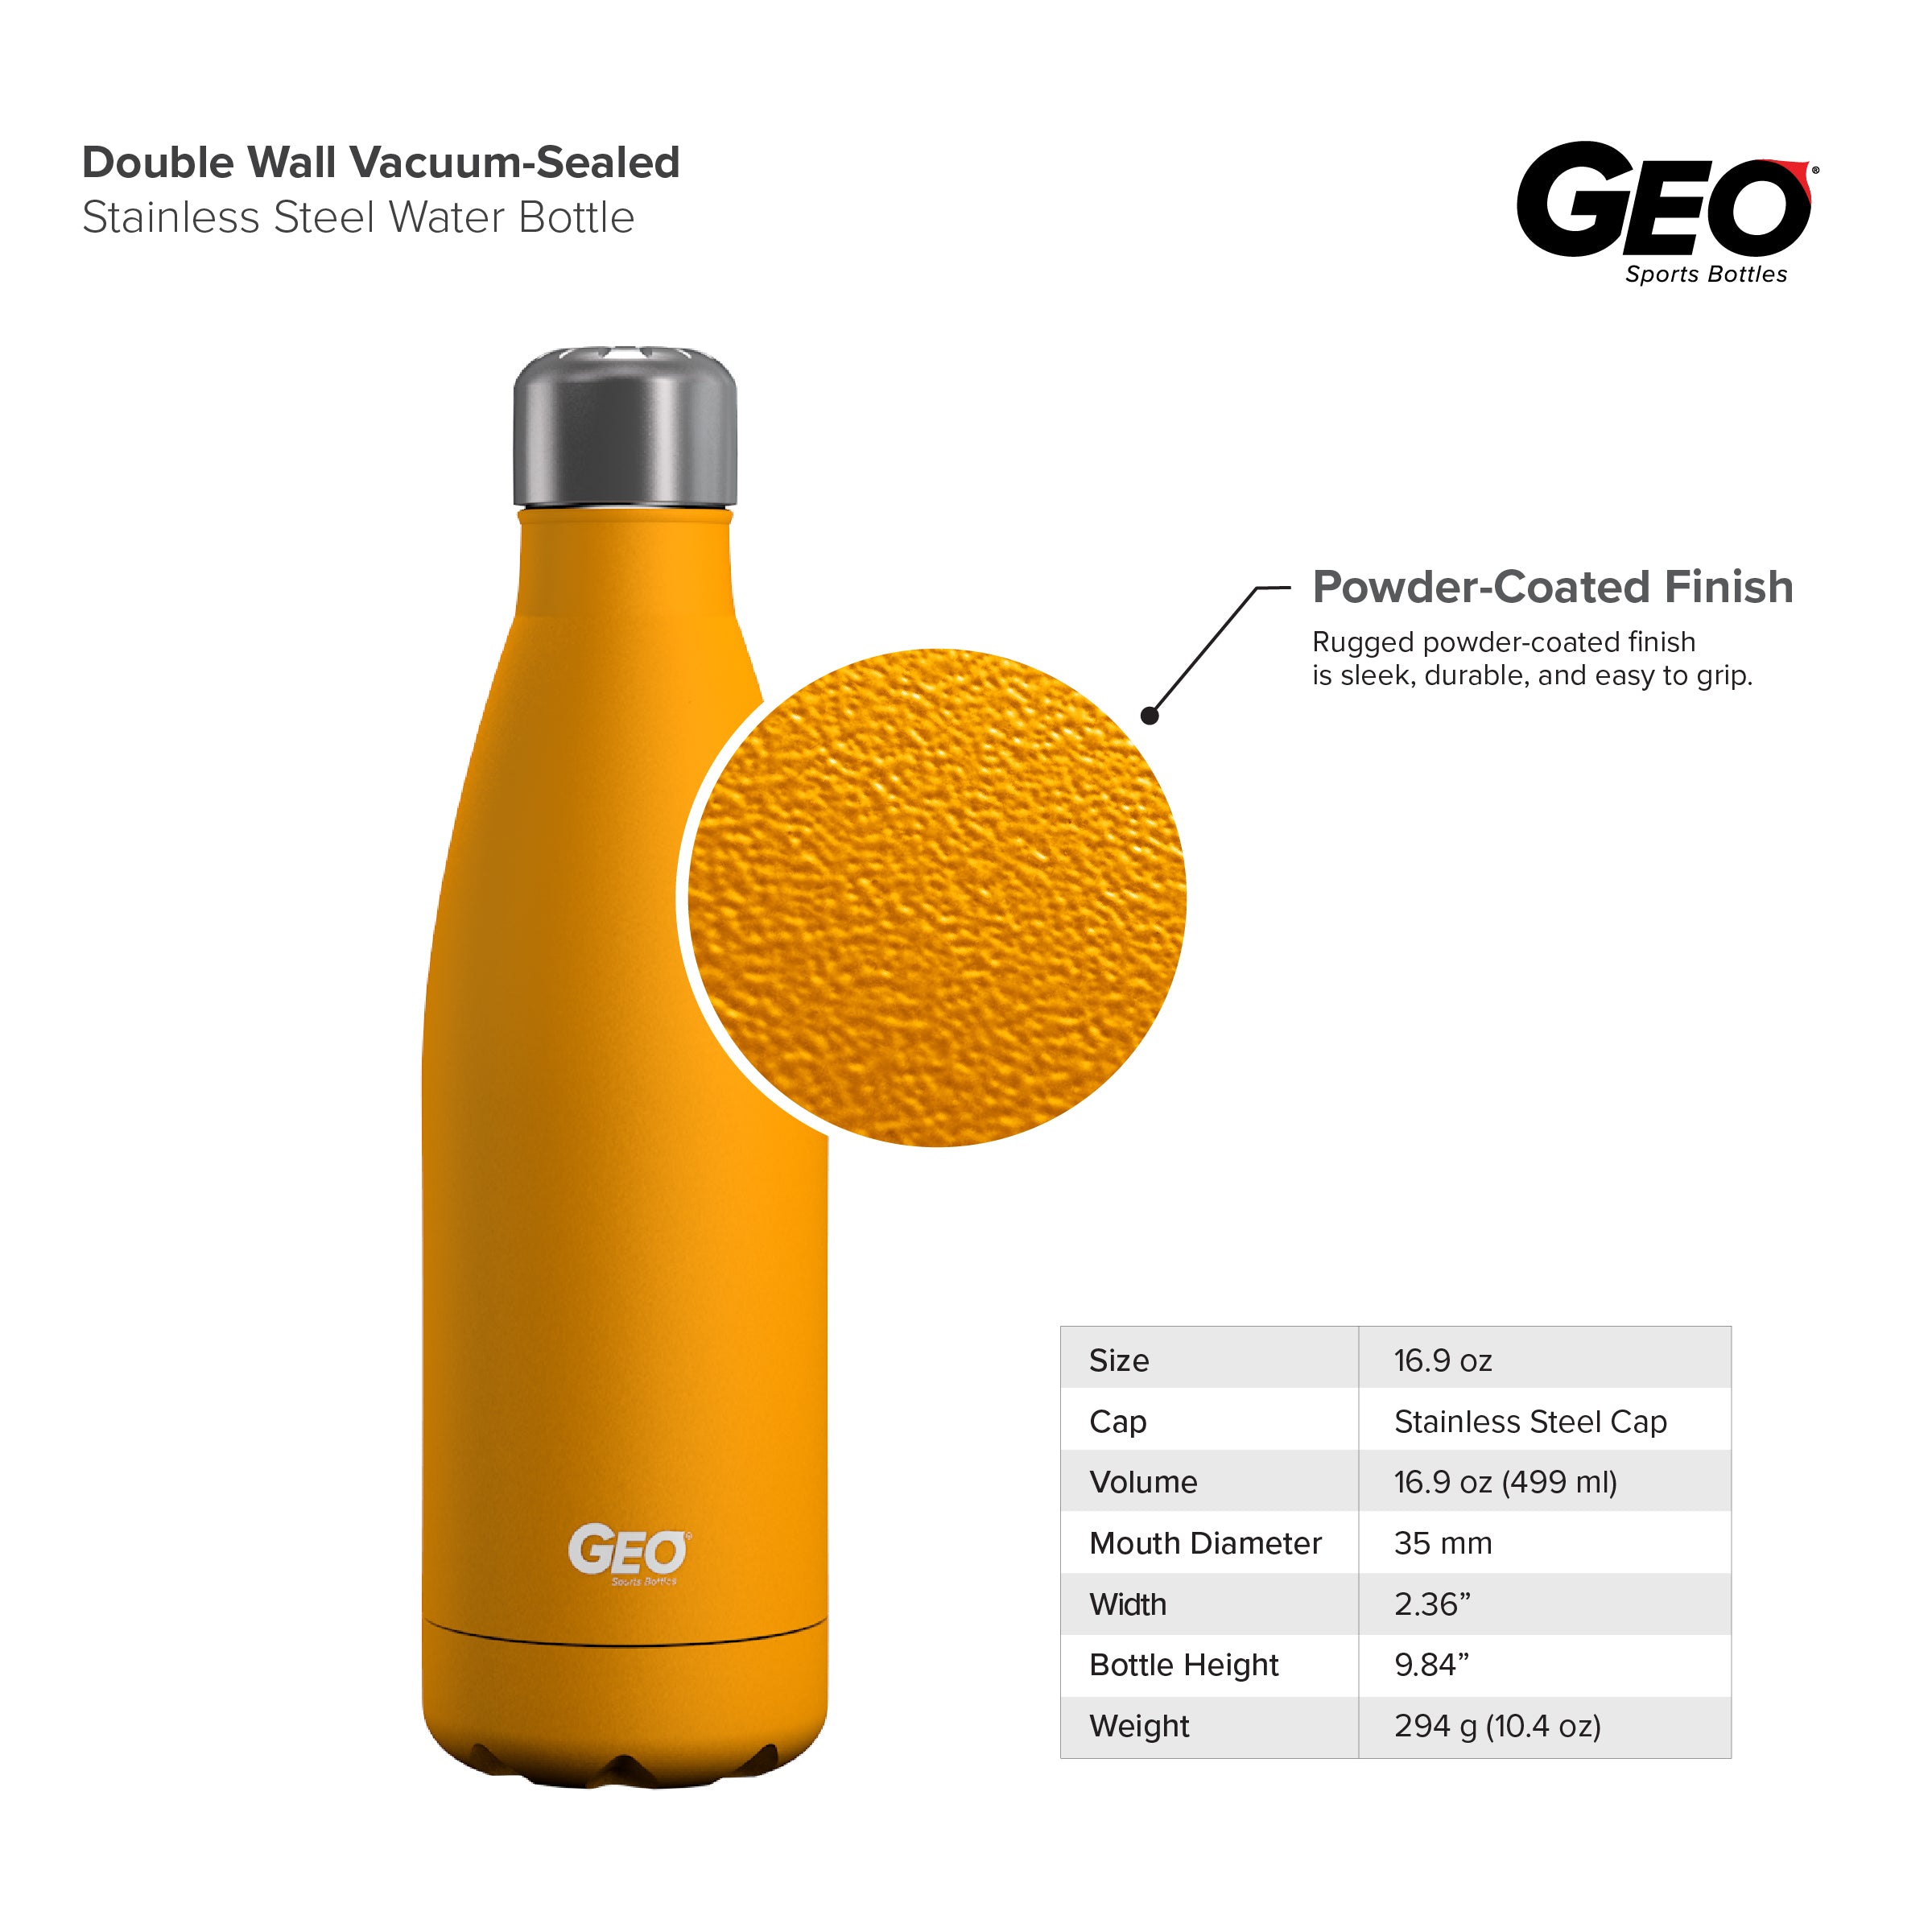 Weight: 229 g- Capacity: 350 ml- Dimensions: 73 mm (L) x 177 mm (H)- 18/8  food grade stainless steel water bottle- Double insulated wall